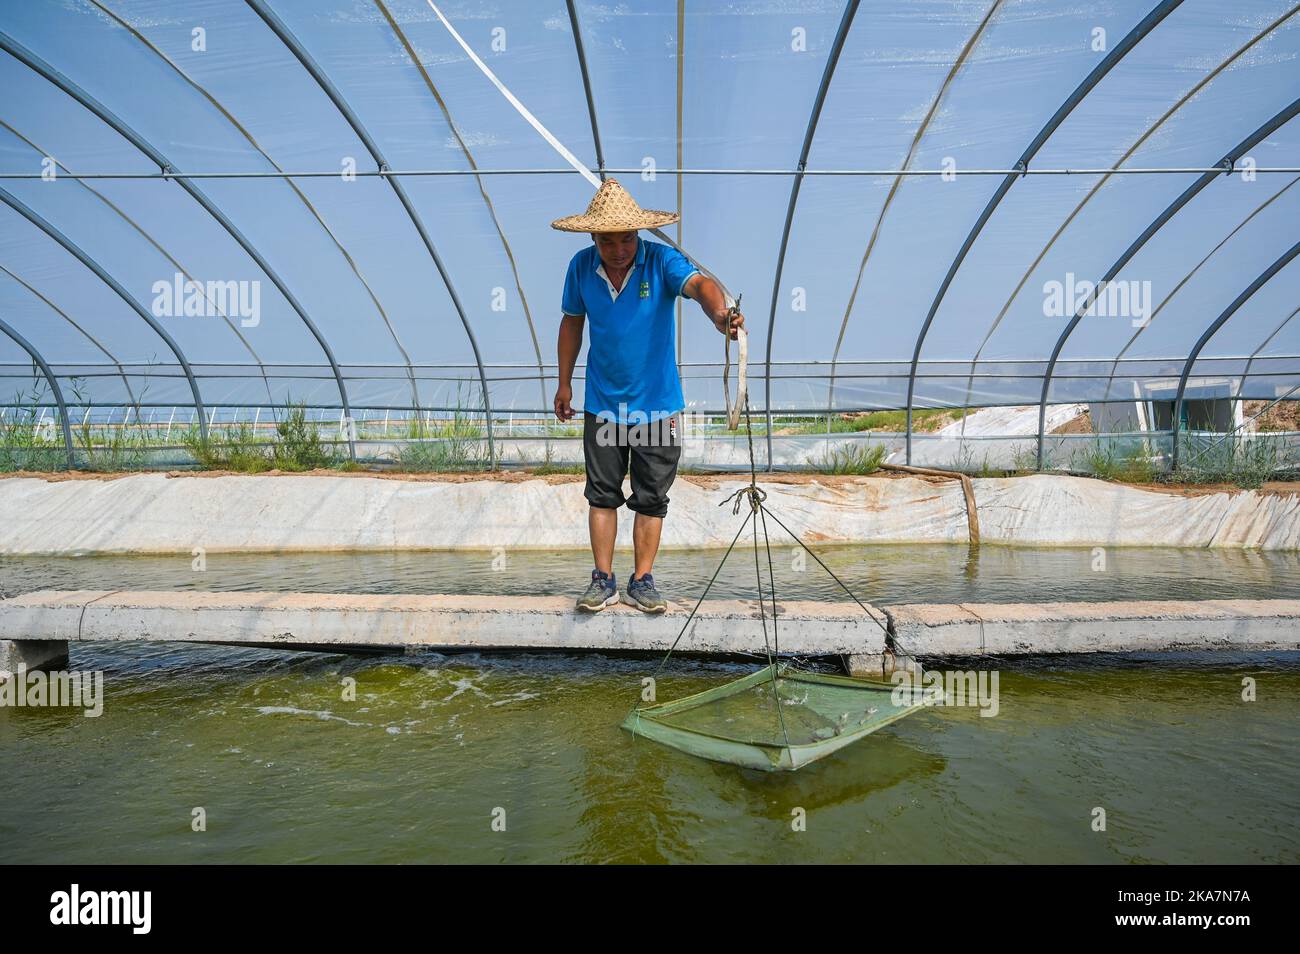 Hohhot. 25th Aug, 2022. A farmer works at a shrimp pond in north China's Inner Mongolia Autonomous Region, Aug. 25, 2022. TO GO WITH 'Across China: Shrimp aquaculture proves lucrative for Inner Mongolia farmers' Credit: Liu Lei/Xinhua/Alamy Live News Stock Photo